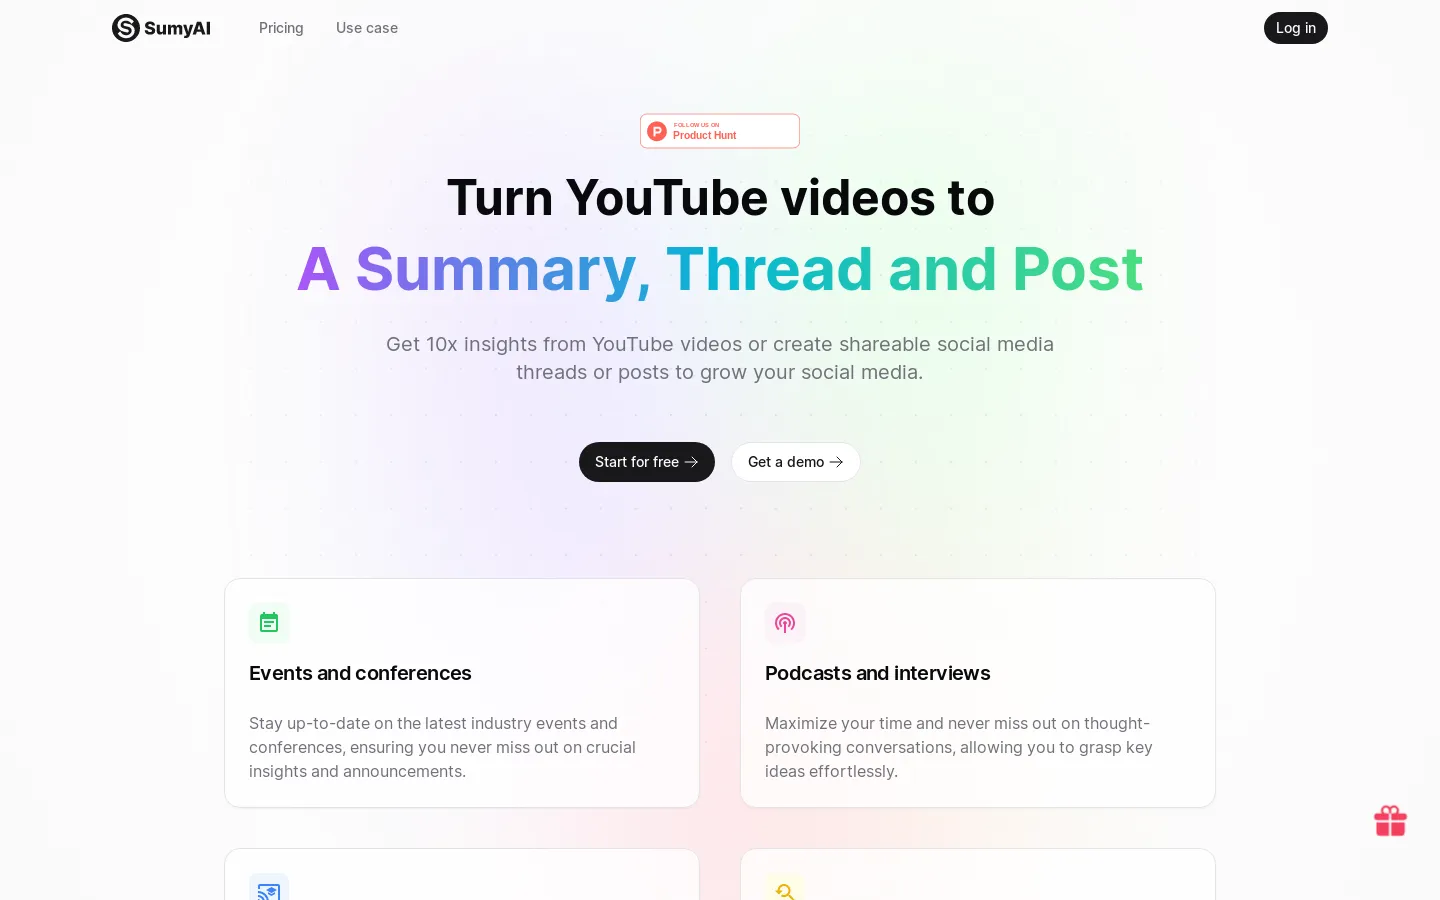 SumyAI - Get insights from Youtube 10x faster 🚀